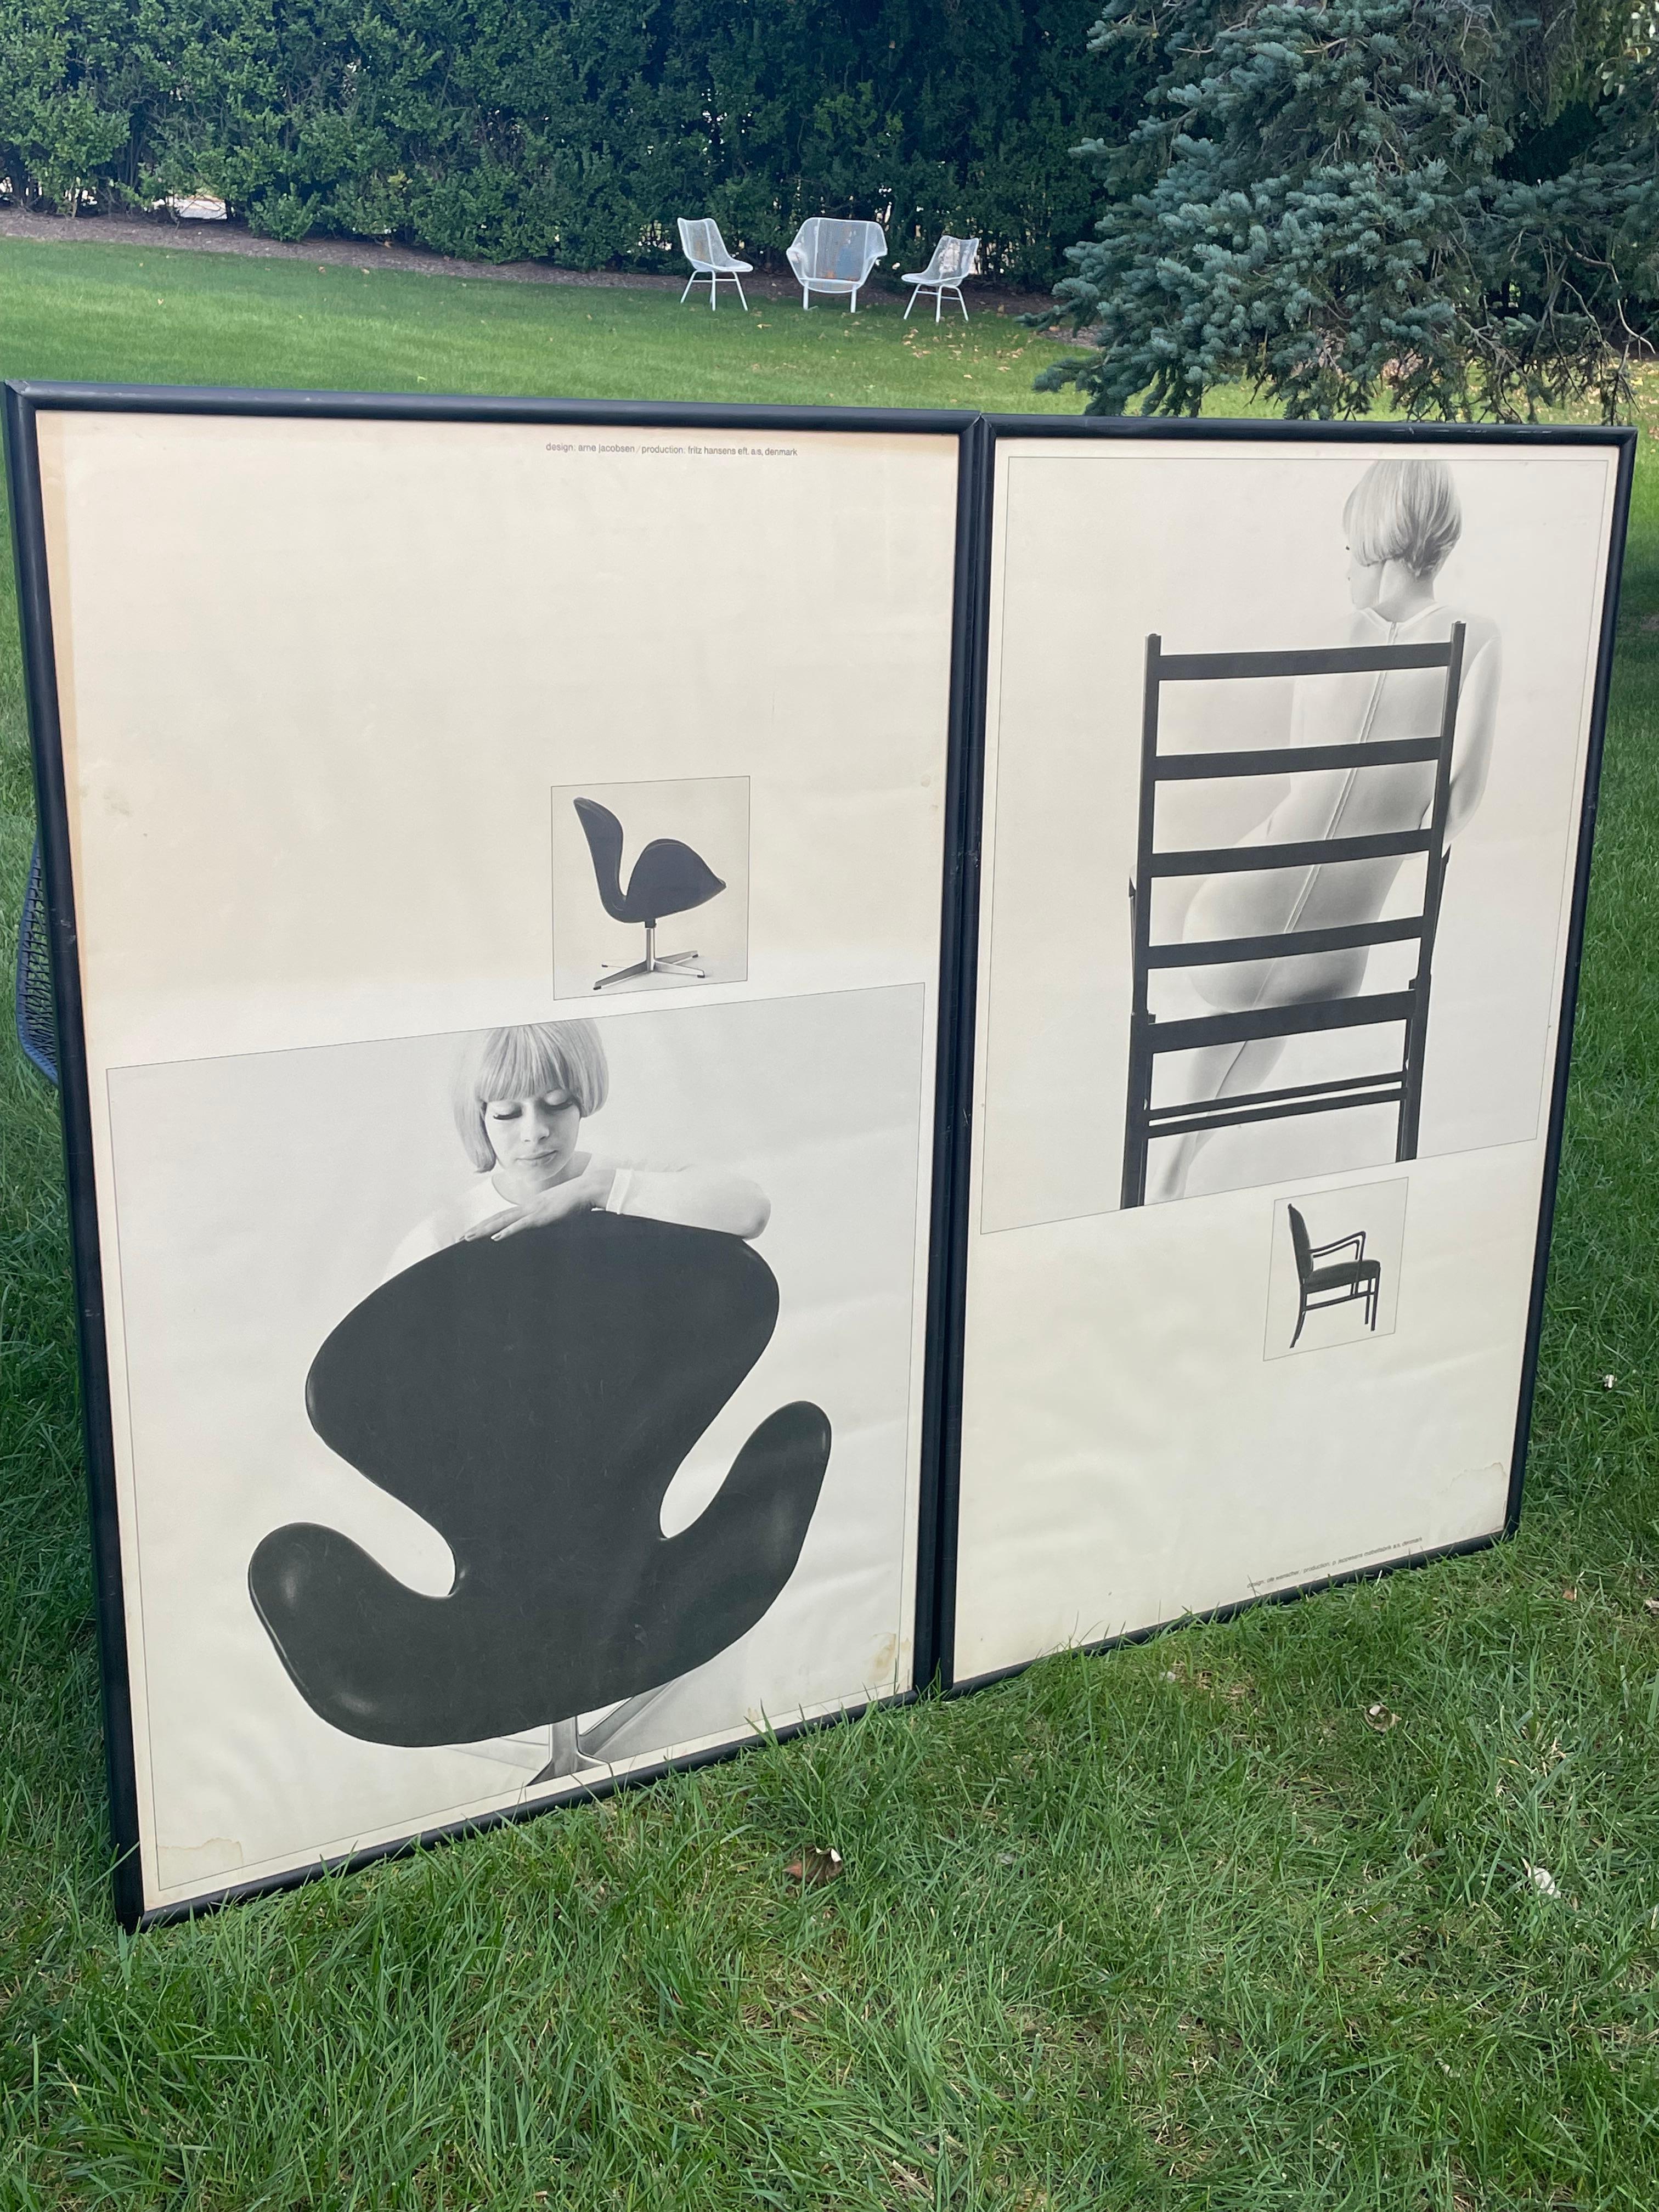 Pair of fabulous black and white Danish design advertising posters photographed by Paul Salomonsen.  One poster is of Arne Jacobsen's famous Swan Chair designed in 1958.  The other is an armchair designed by Ole Wanscher, a leading figure in the